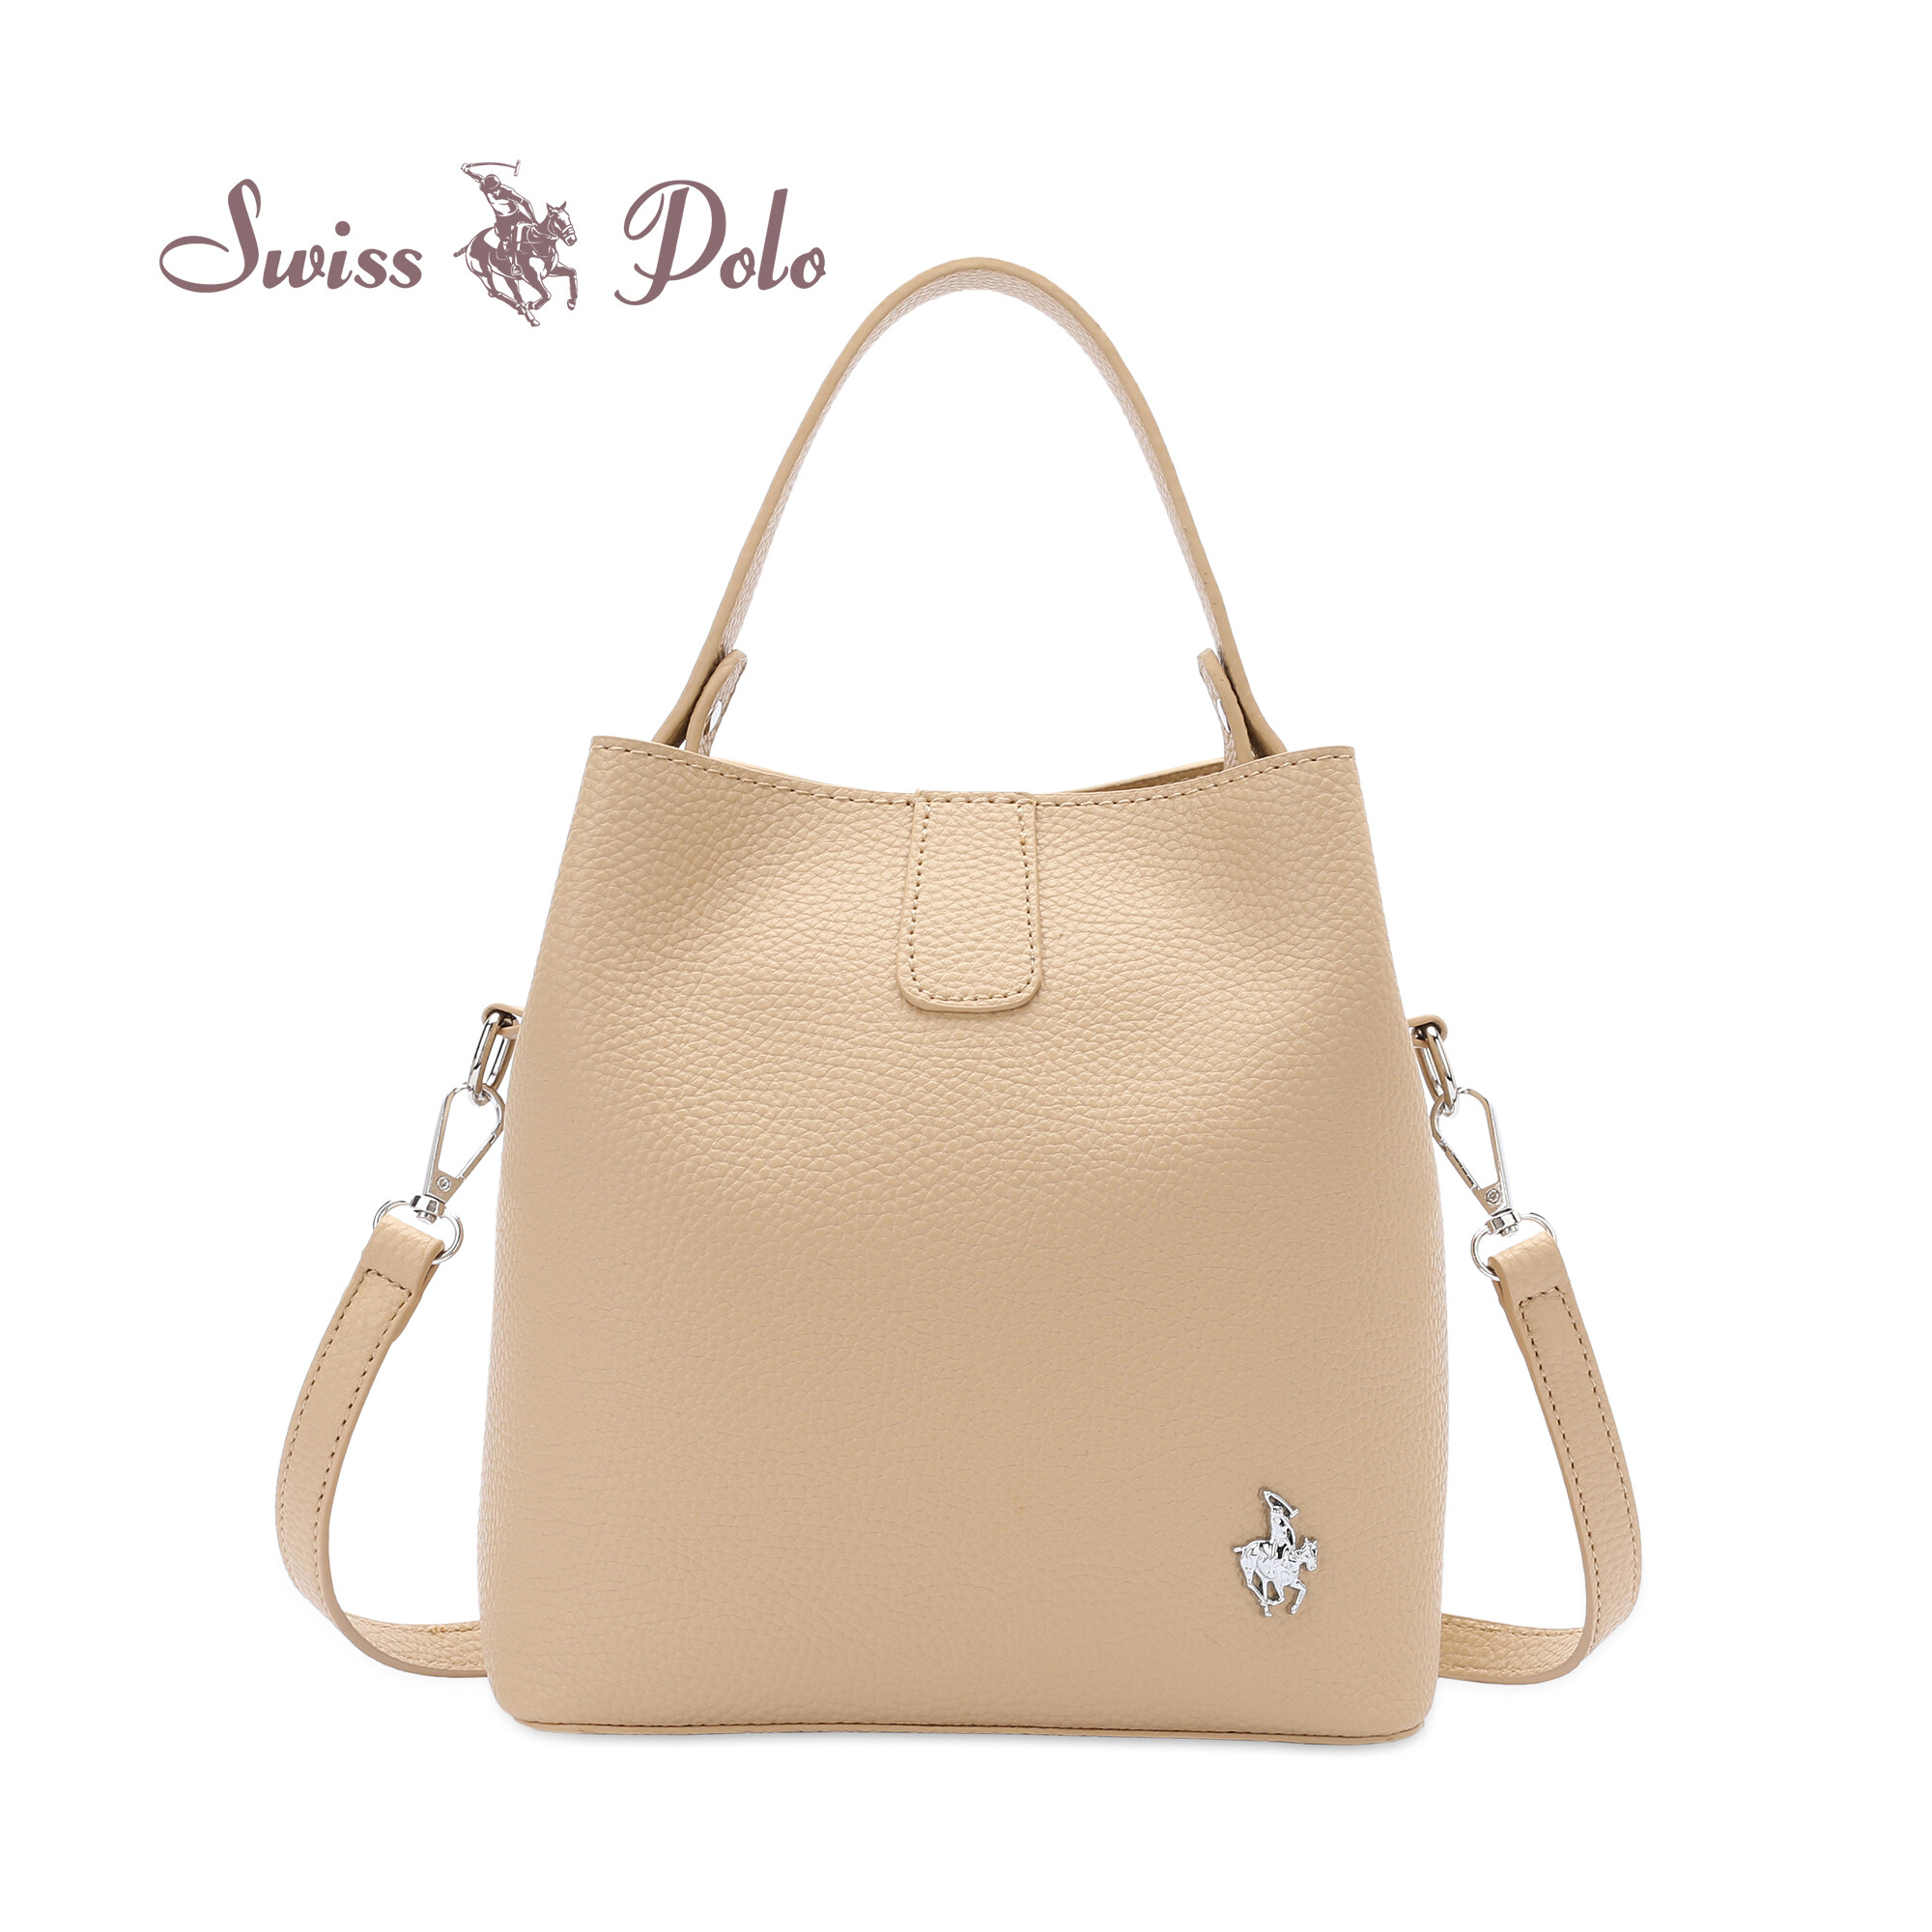 SWISS POLO Ladies Top Handle Sling Bag HDW 342-4 APRICOT